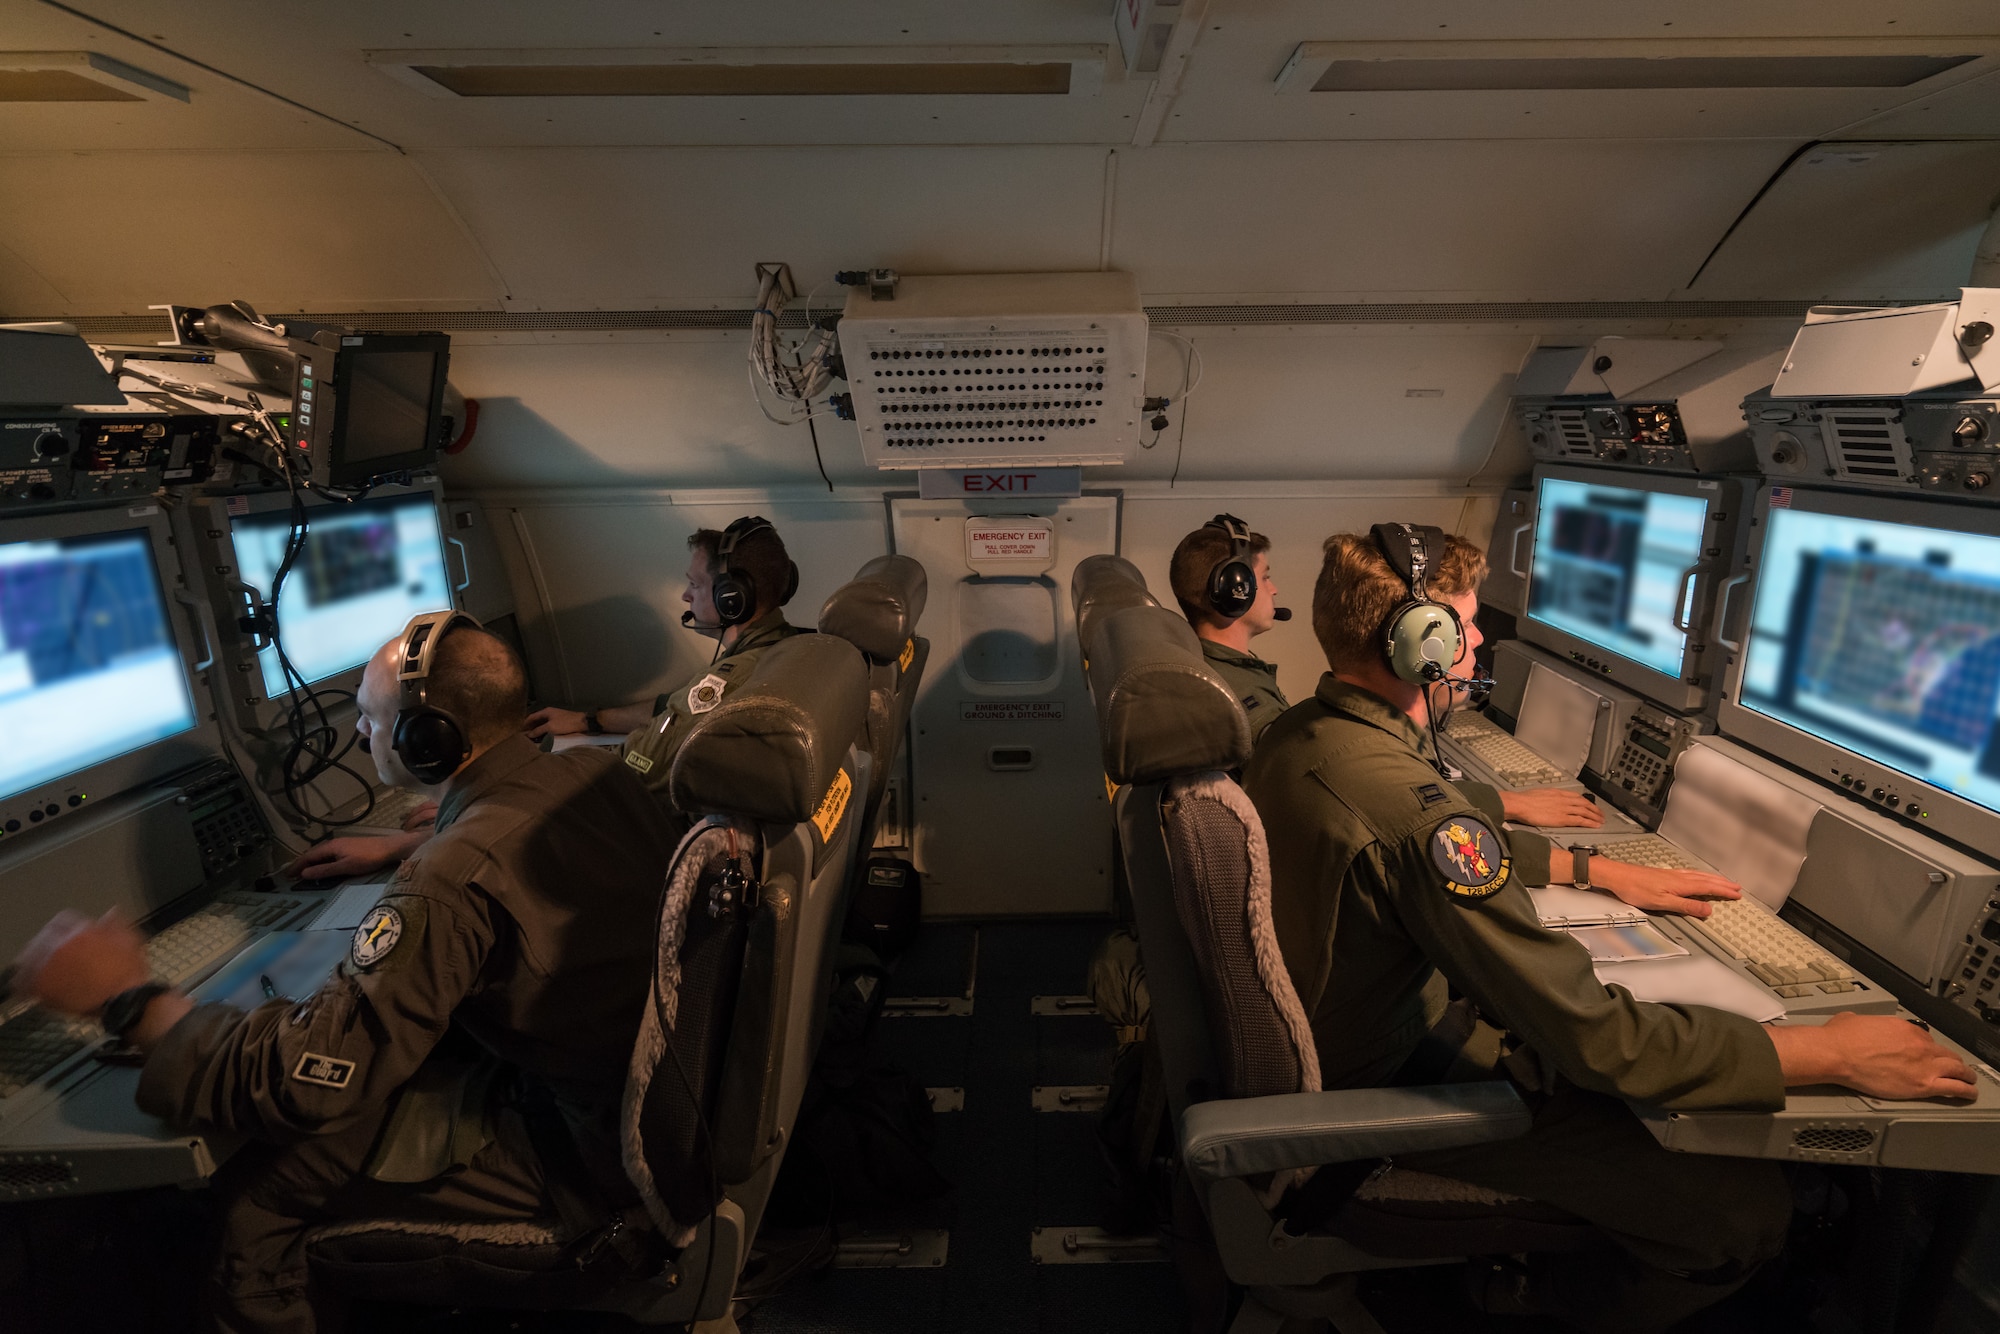 U.S. Air Force aircrew members from the 116th Air Control Wing (ACW), Georgia Air National Guard, monitor surveillance data while flying a night mission aboard an E-8C Joint STARS, Robins Air Force Base, Ga., July 13, 2017. Team JSTARS, consisting of the 116th ACW, active-duty 461st ACW and Army JSTARS, provides joint airborne command and control, intelligence, surveillance, and reconnaissance support over land and water to combatant commanders around the globe. The Total Force Integration unit operates the world’s only Joint STARS weapon system based out of Robins Air Force Base. (U.S. Air National Guard photo by Senior Master Sgt. Roger Parsons) (Portions of the photo have been blurred for security and privacy concerns)